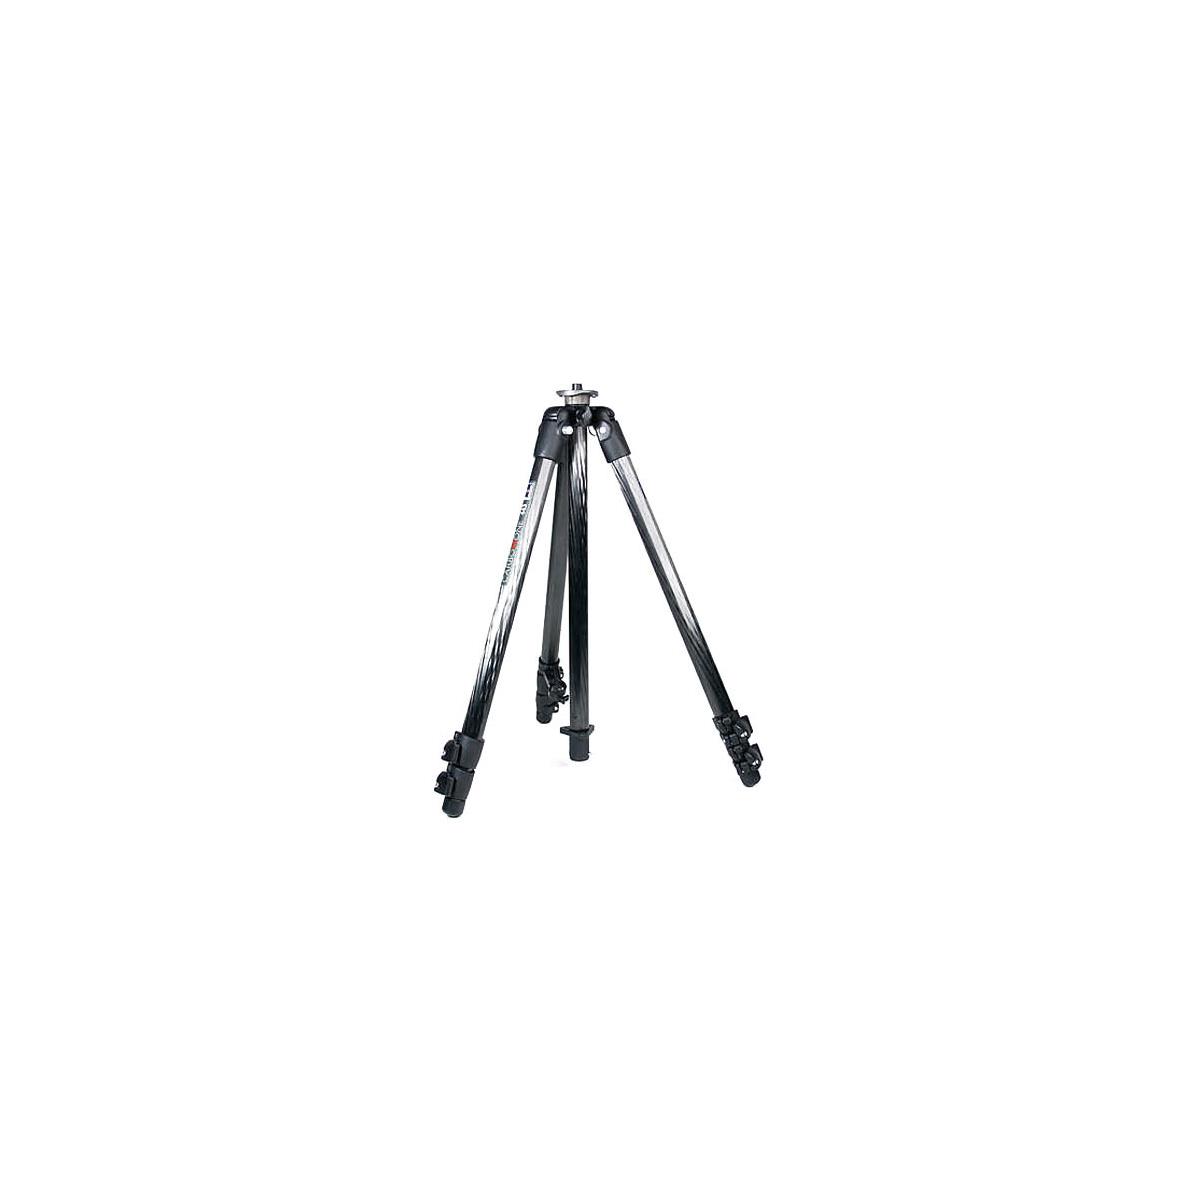 Image of Manfrotto 444 Carbon 1 Tripod Legs (Compact 4 section)